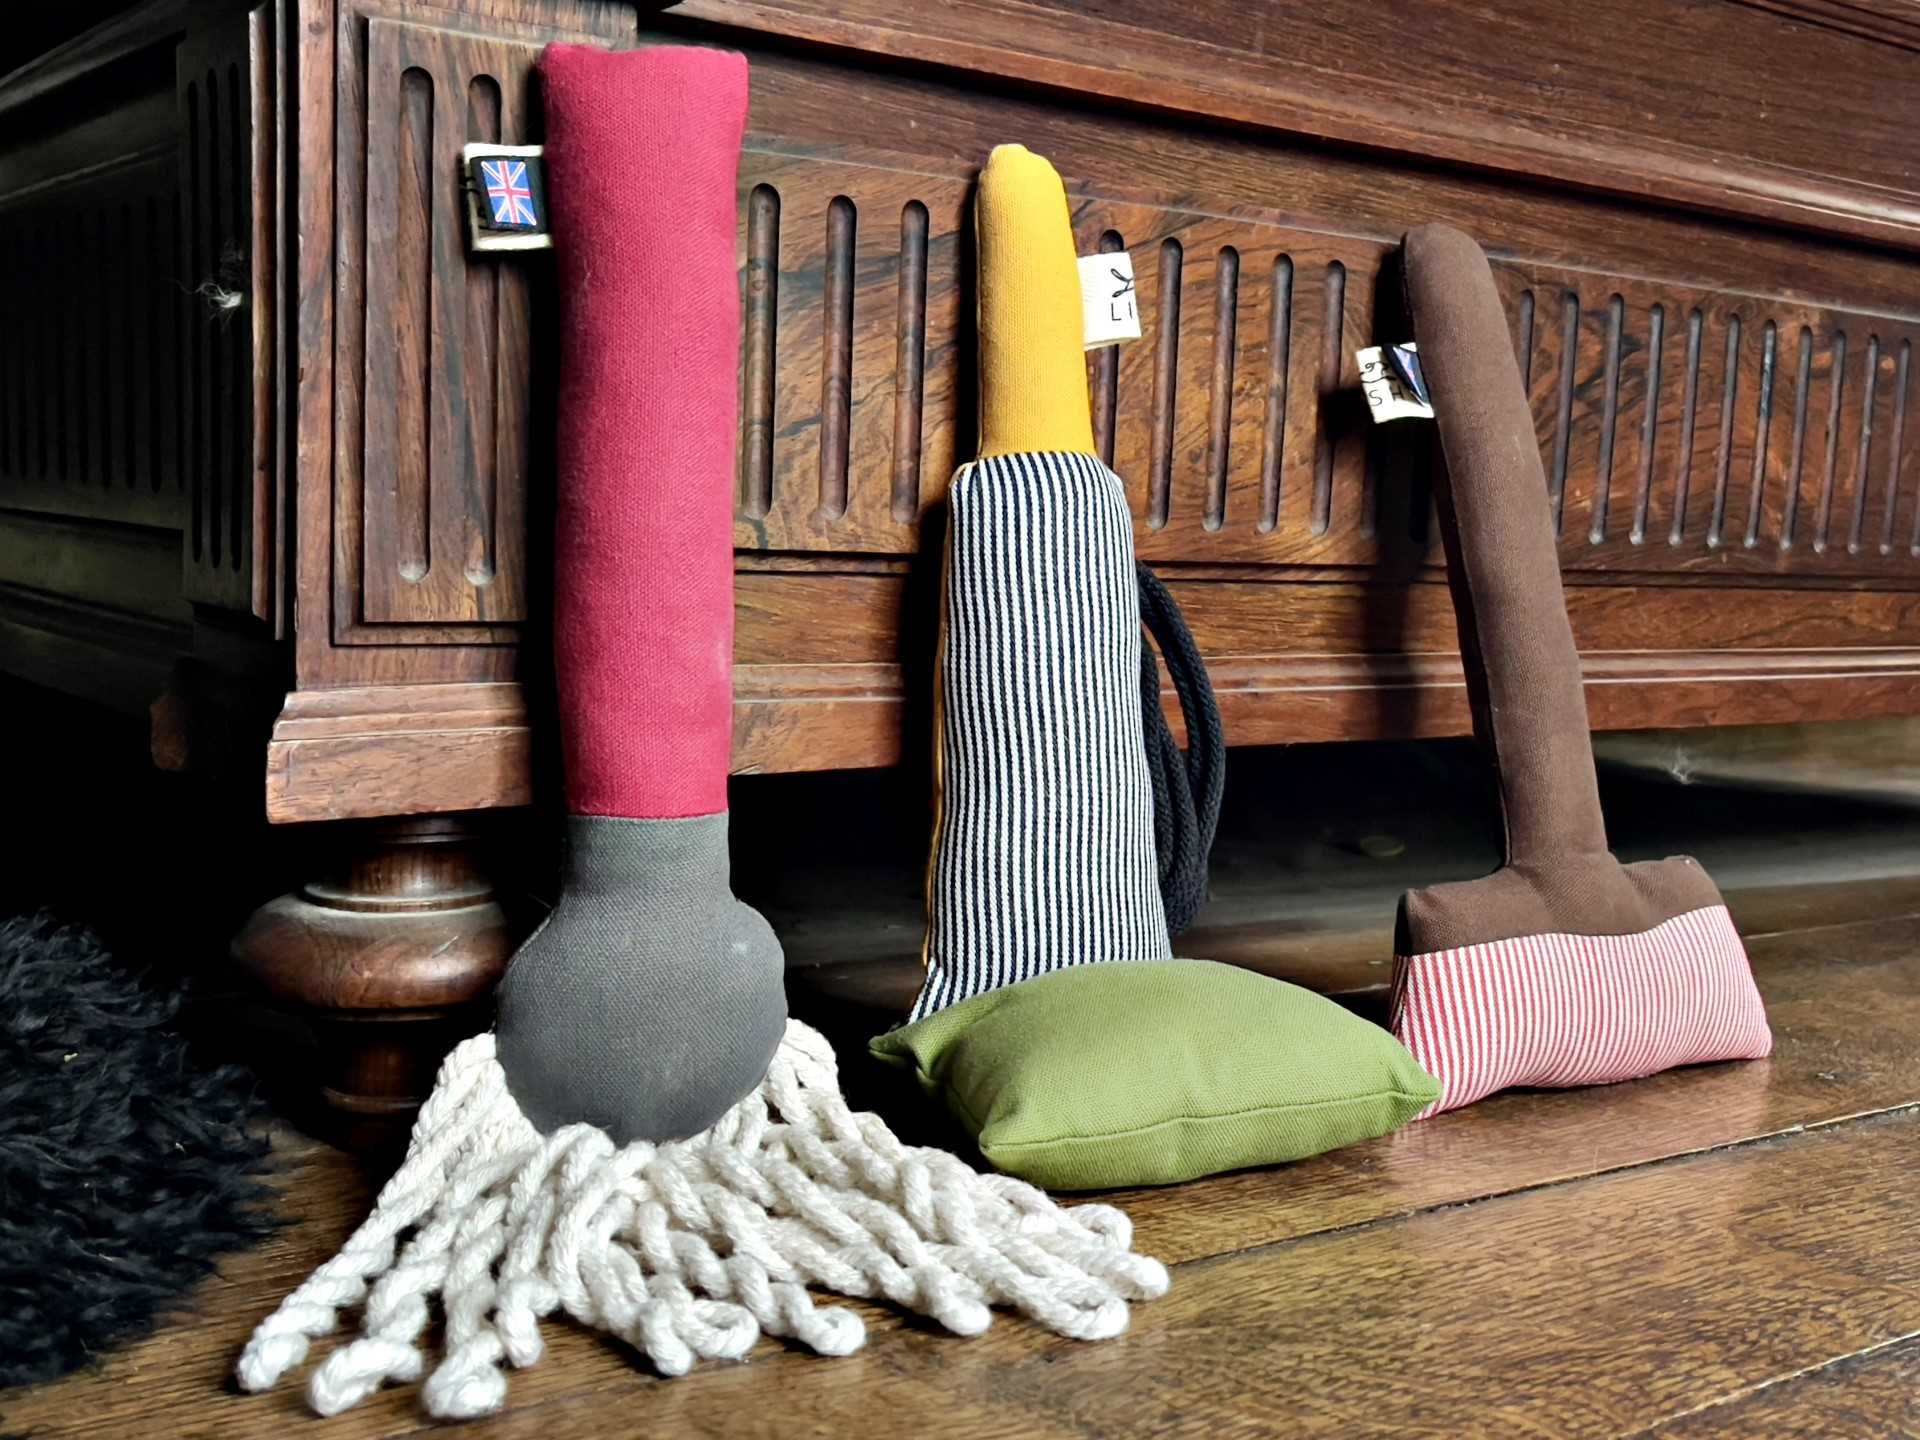 Lot 96 - Canine Couture: Set of handcrafted LISH London squeaky luxury dog toys - vacuum, broom & mop